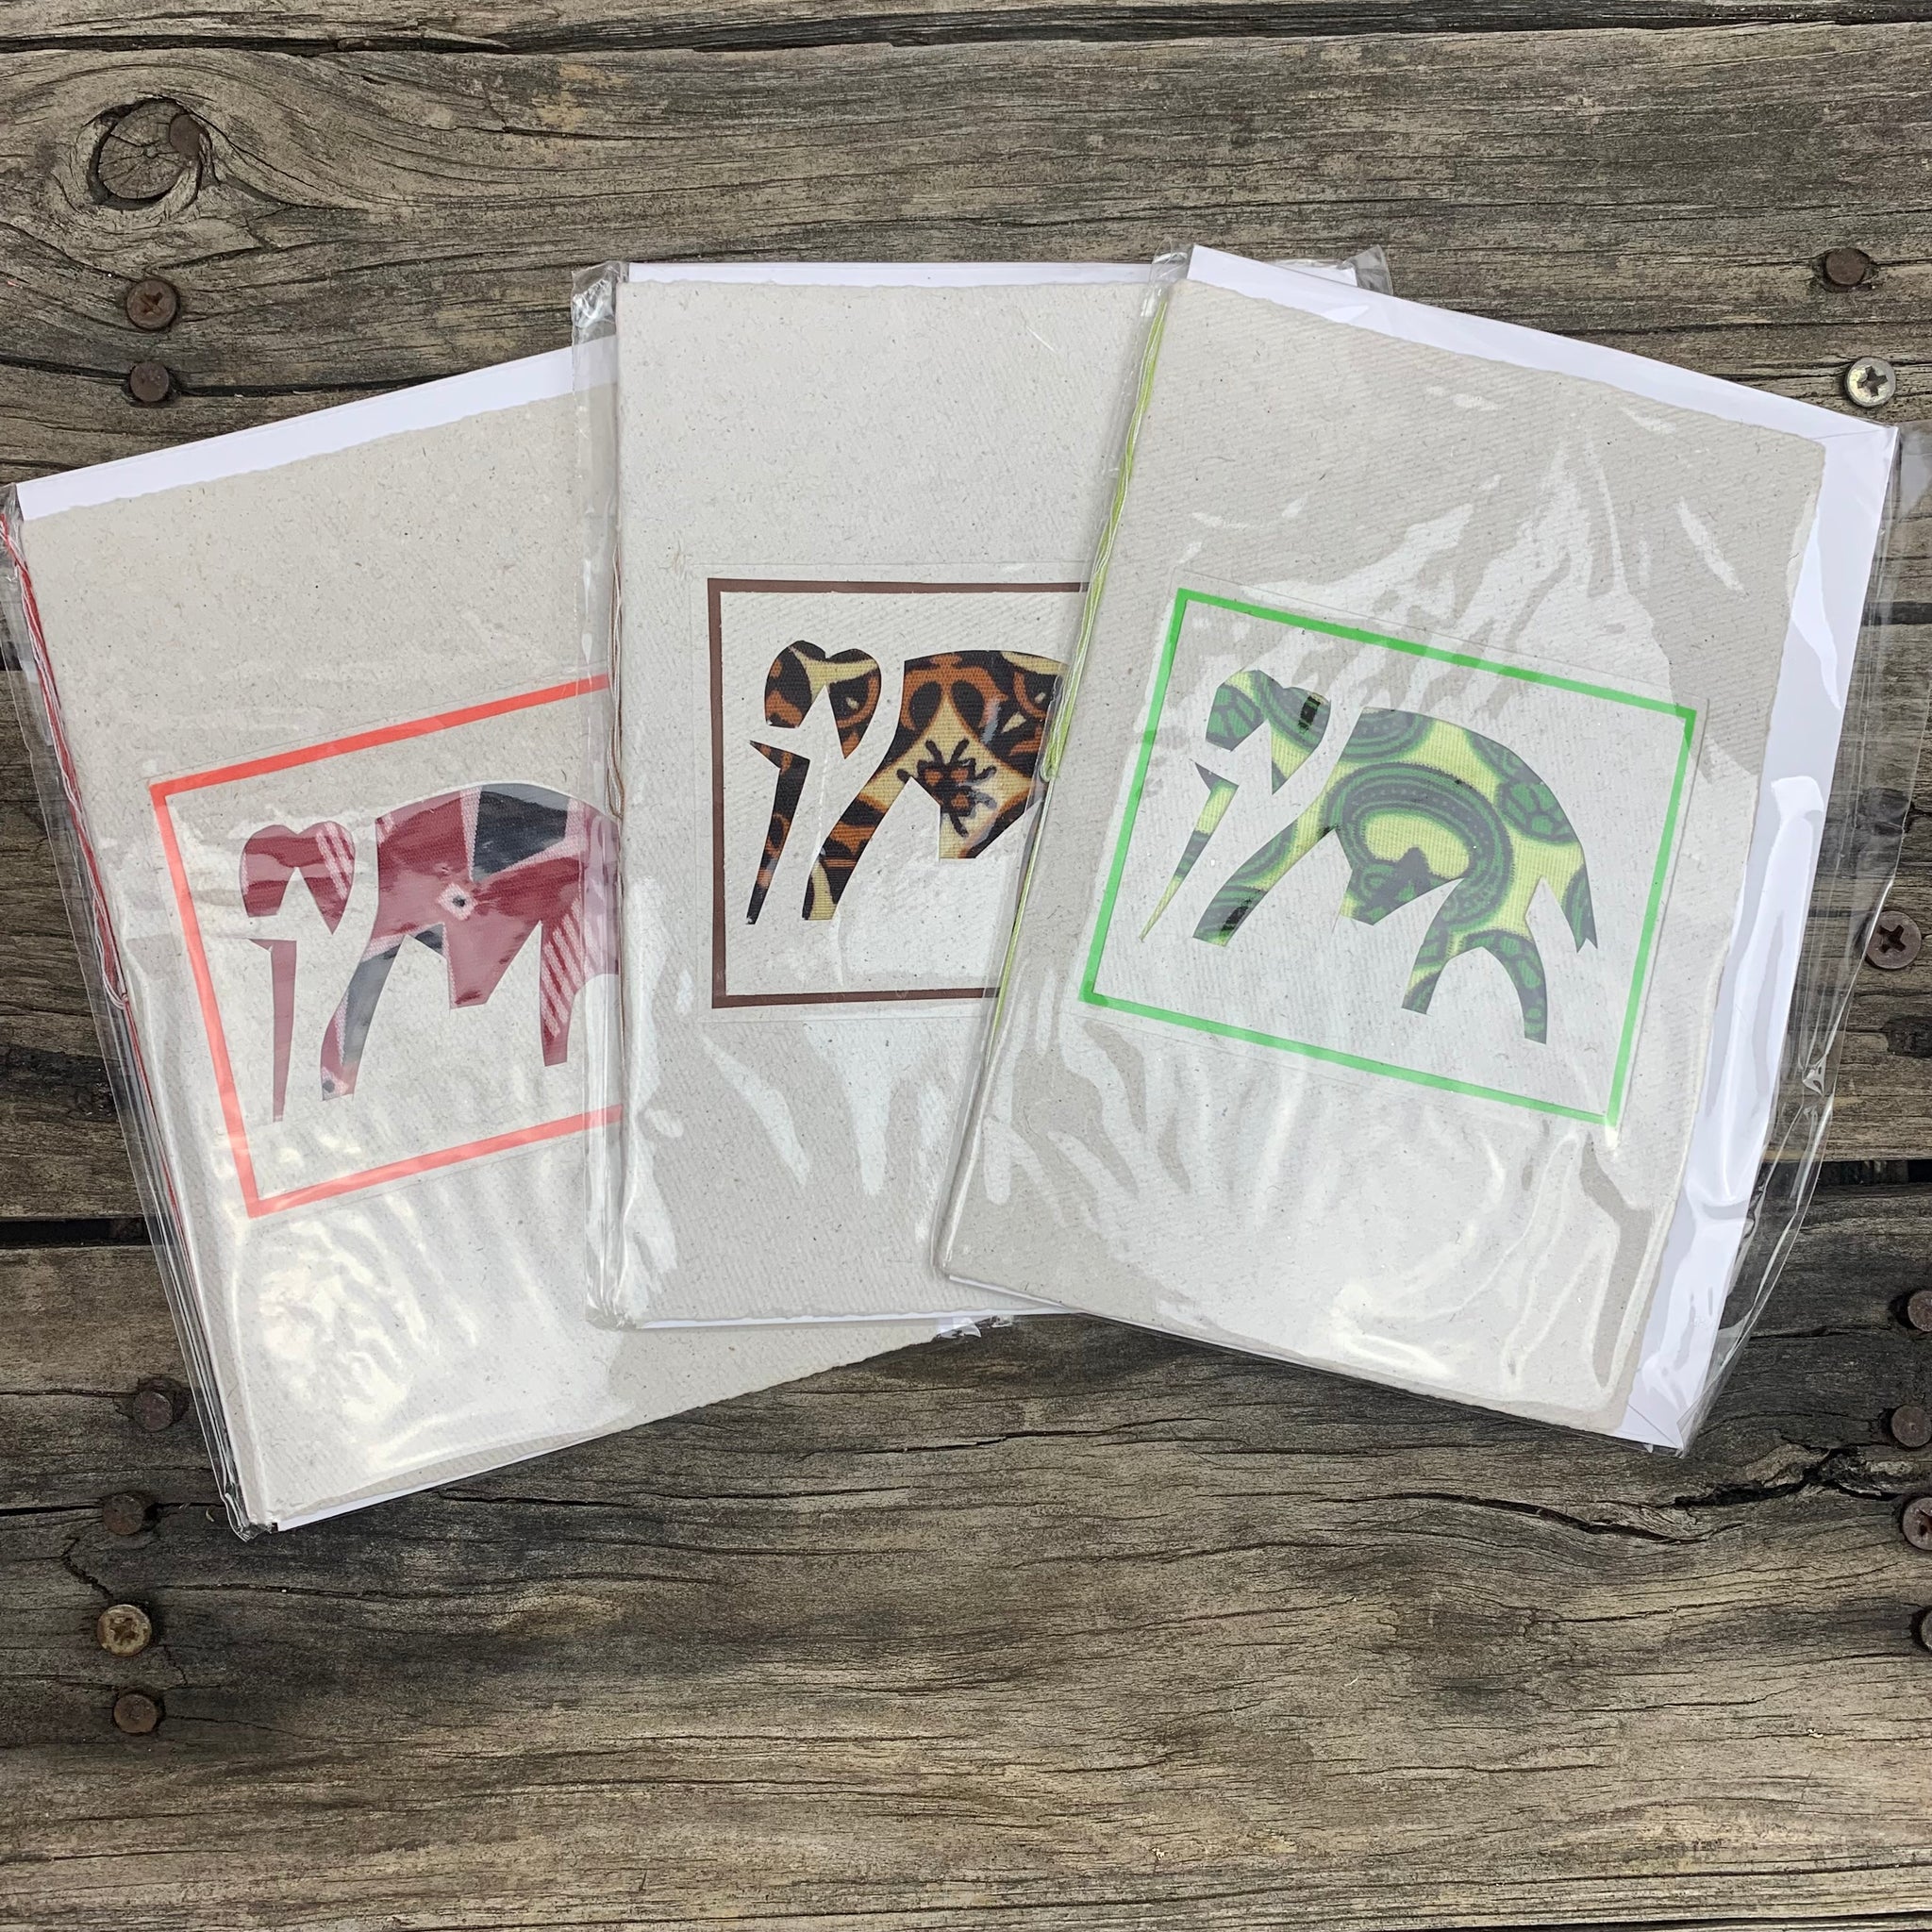 White handmade paper greeting card displaying an elephant in the centre. There are 3 differentiating designs, a red elephant, a brown one, and a green one - all bordered by their respective colours 